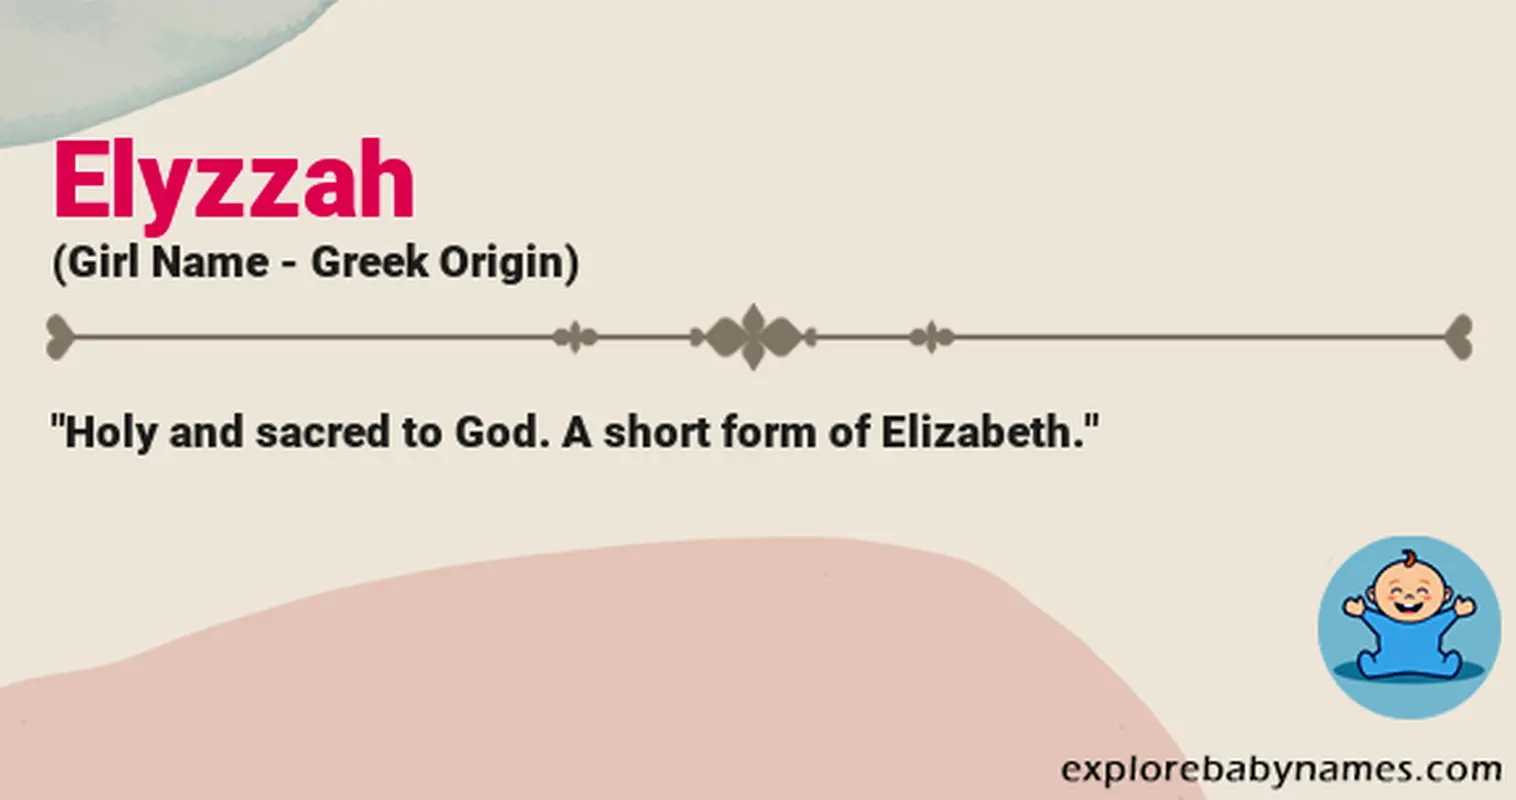 Meaning of Elyzzah